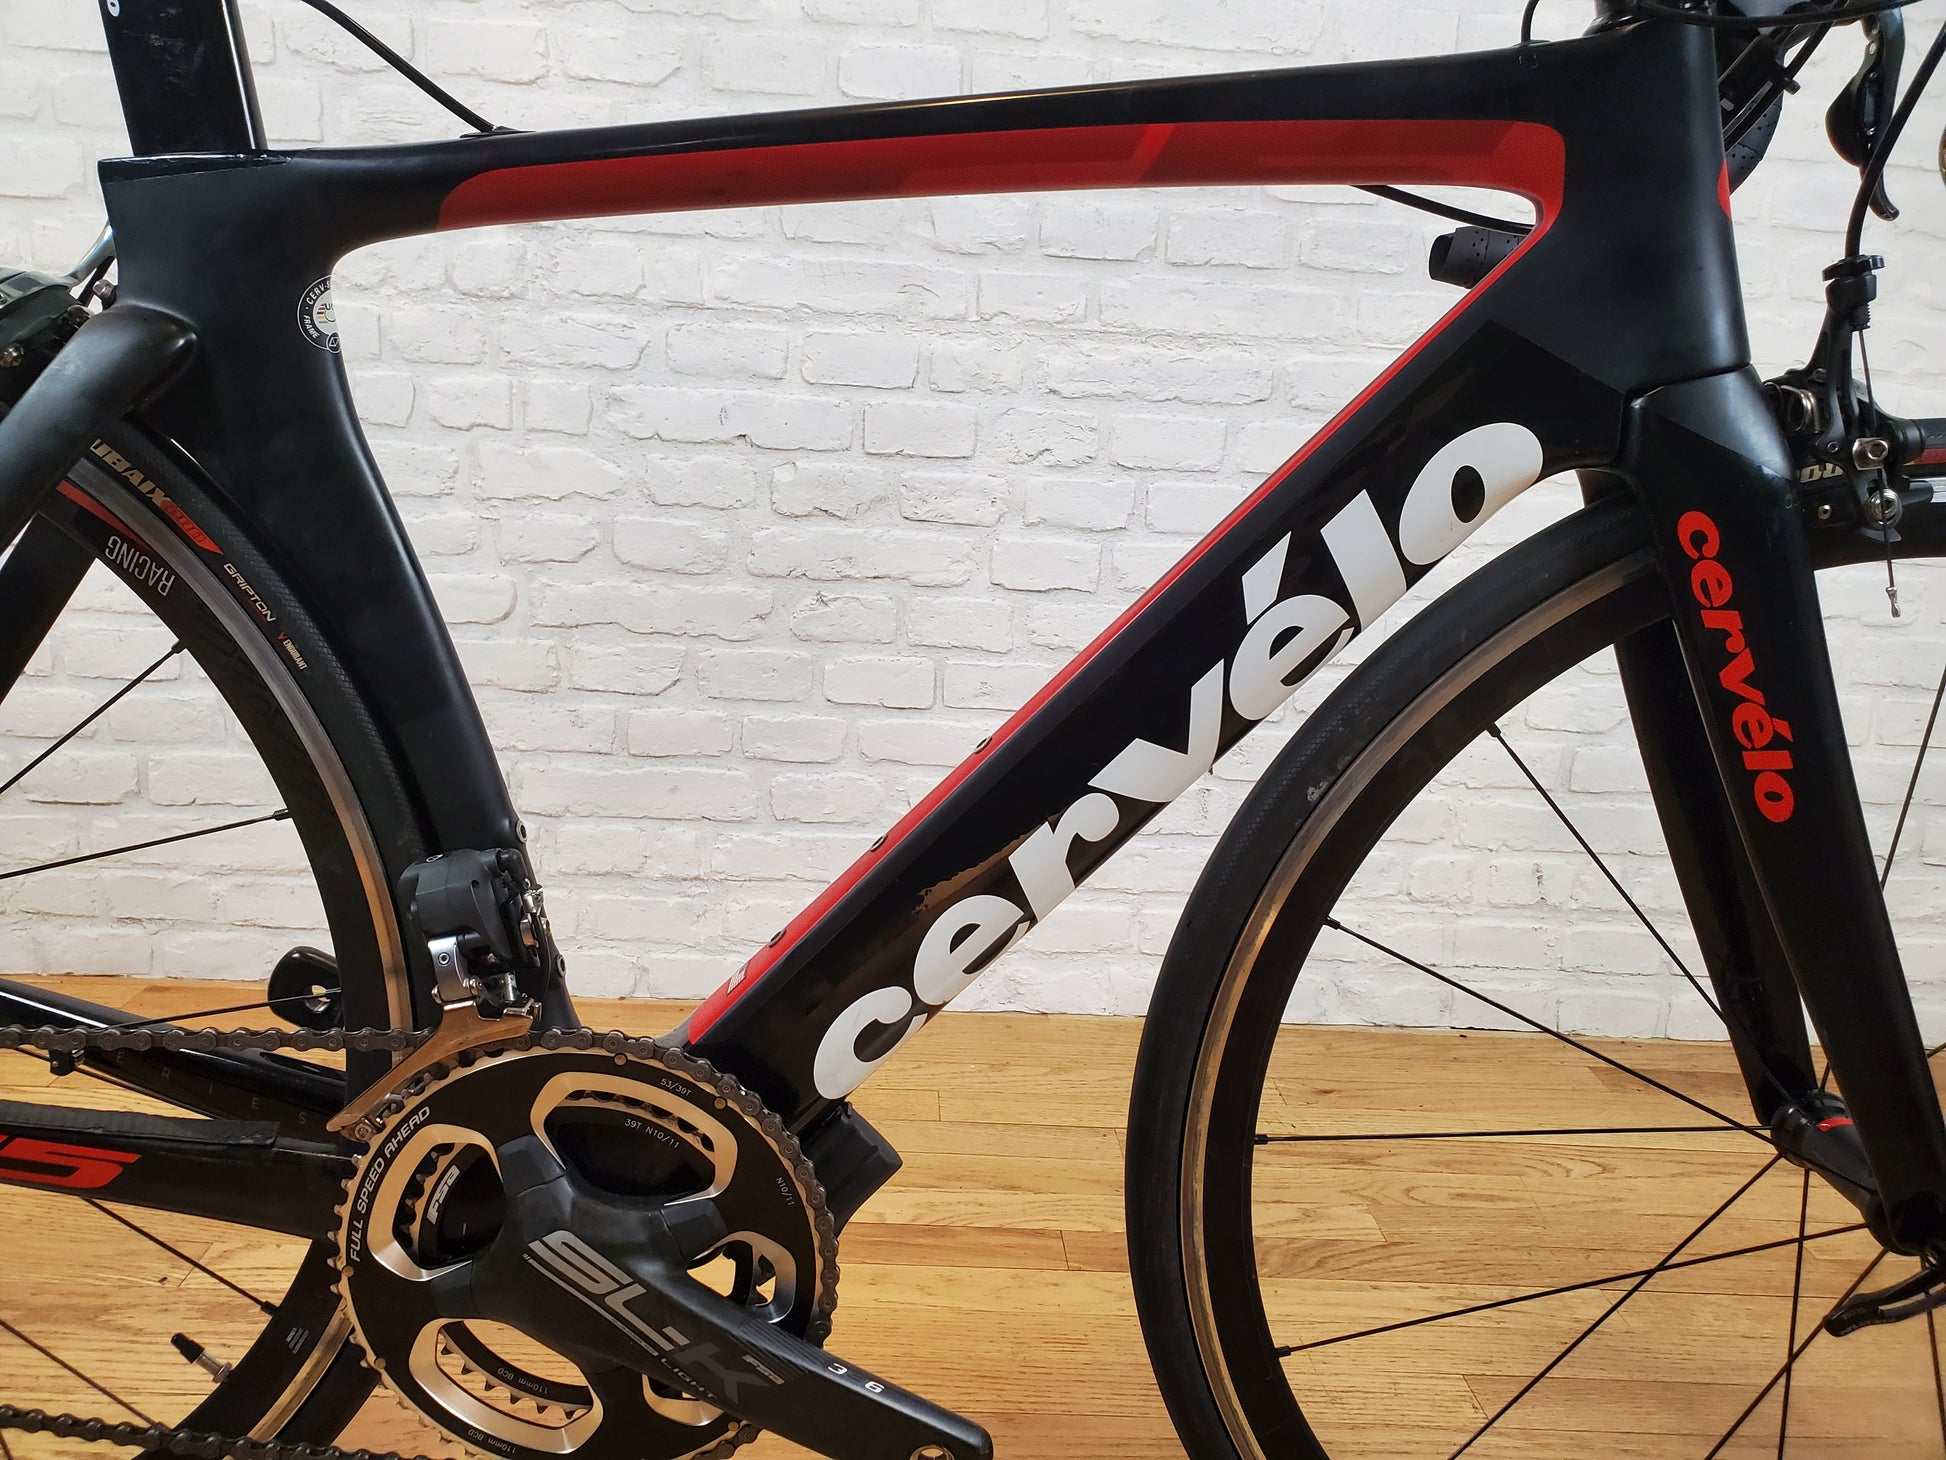 54cm frame size suitable for someone around 5'9 feet tall Cervelo S5 road bike